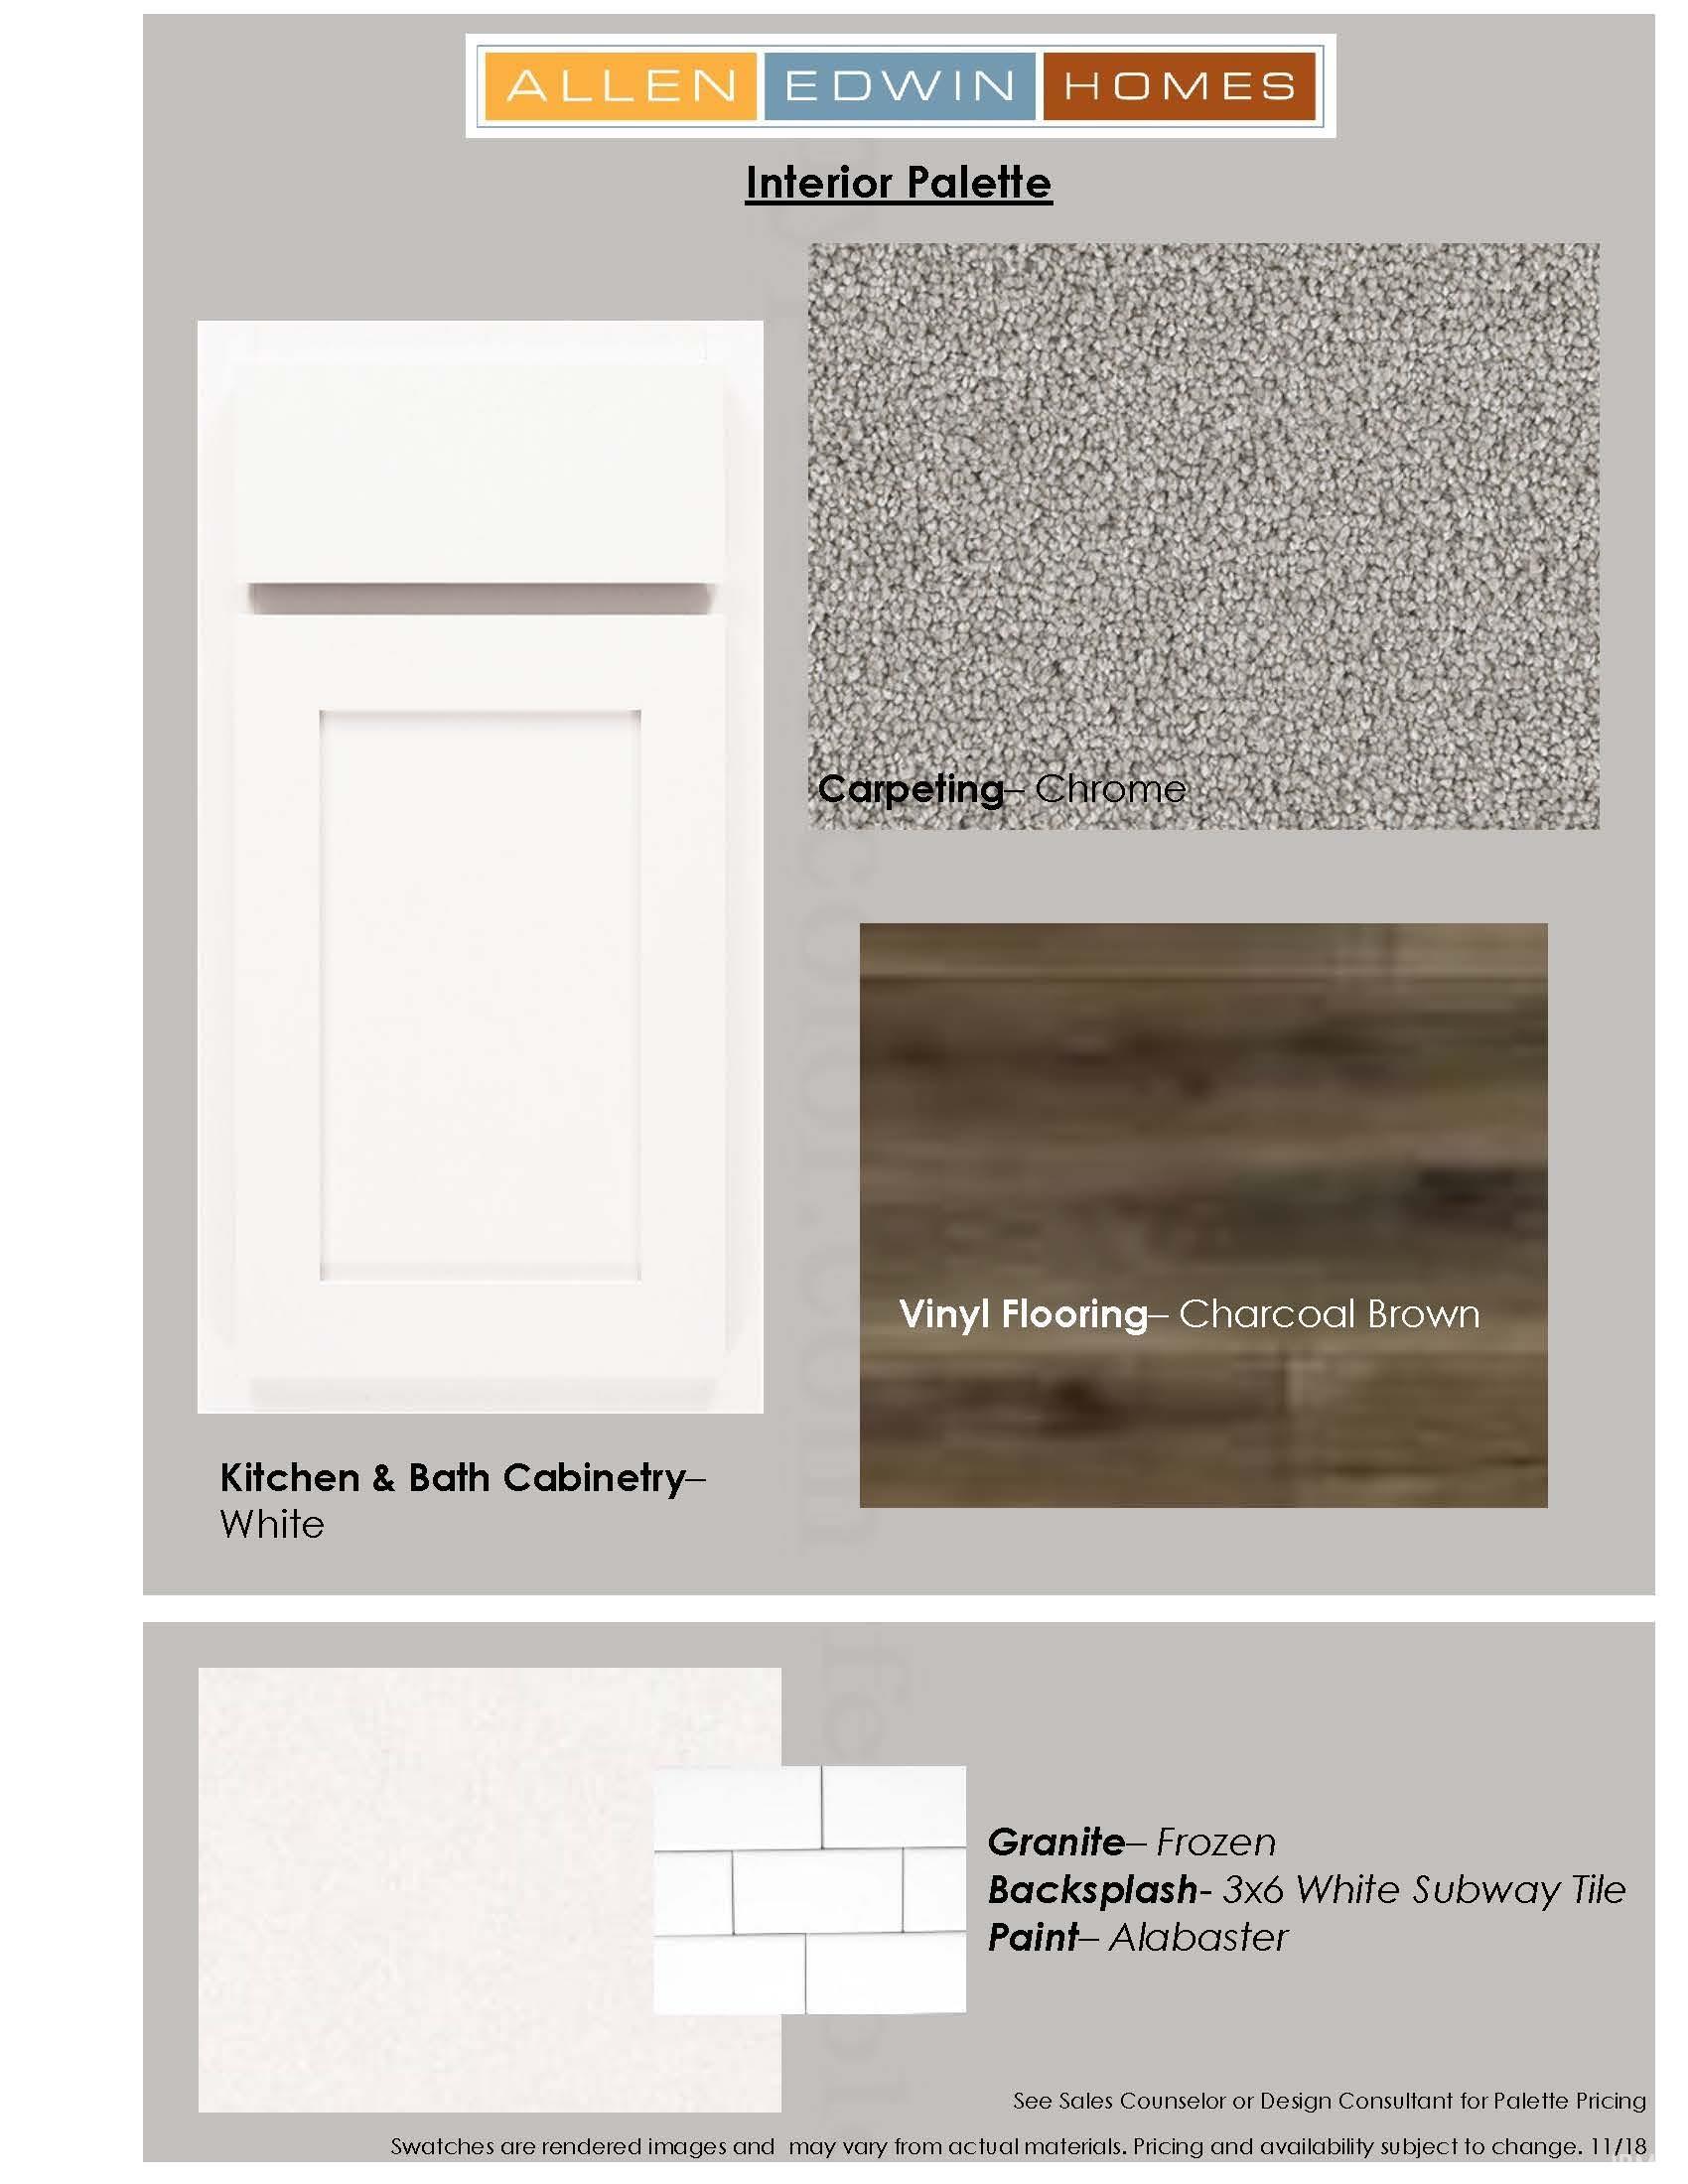 Photo of interior finishes to be used in home under construction.